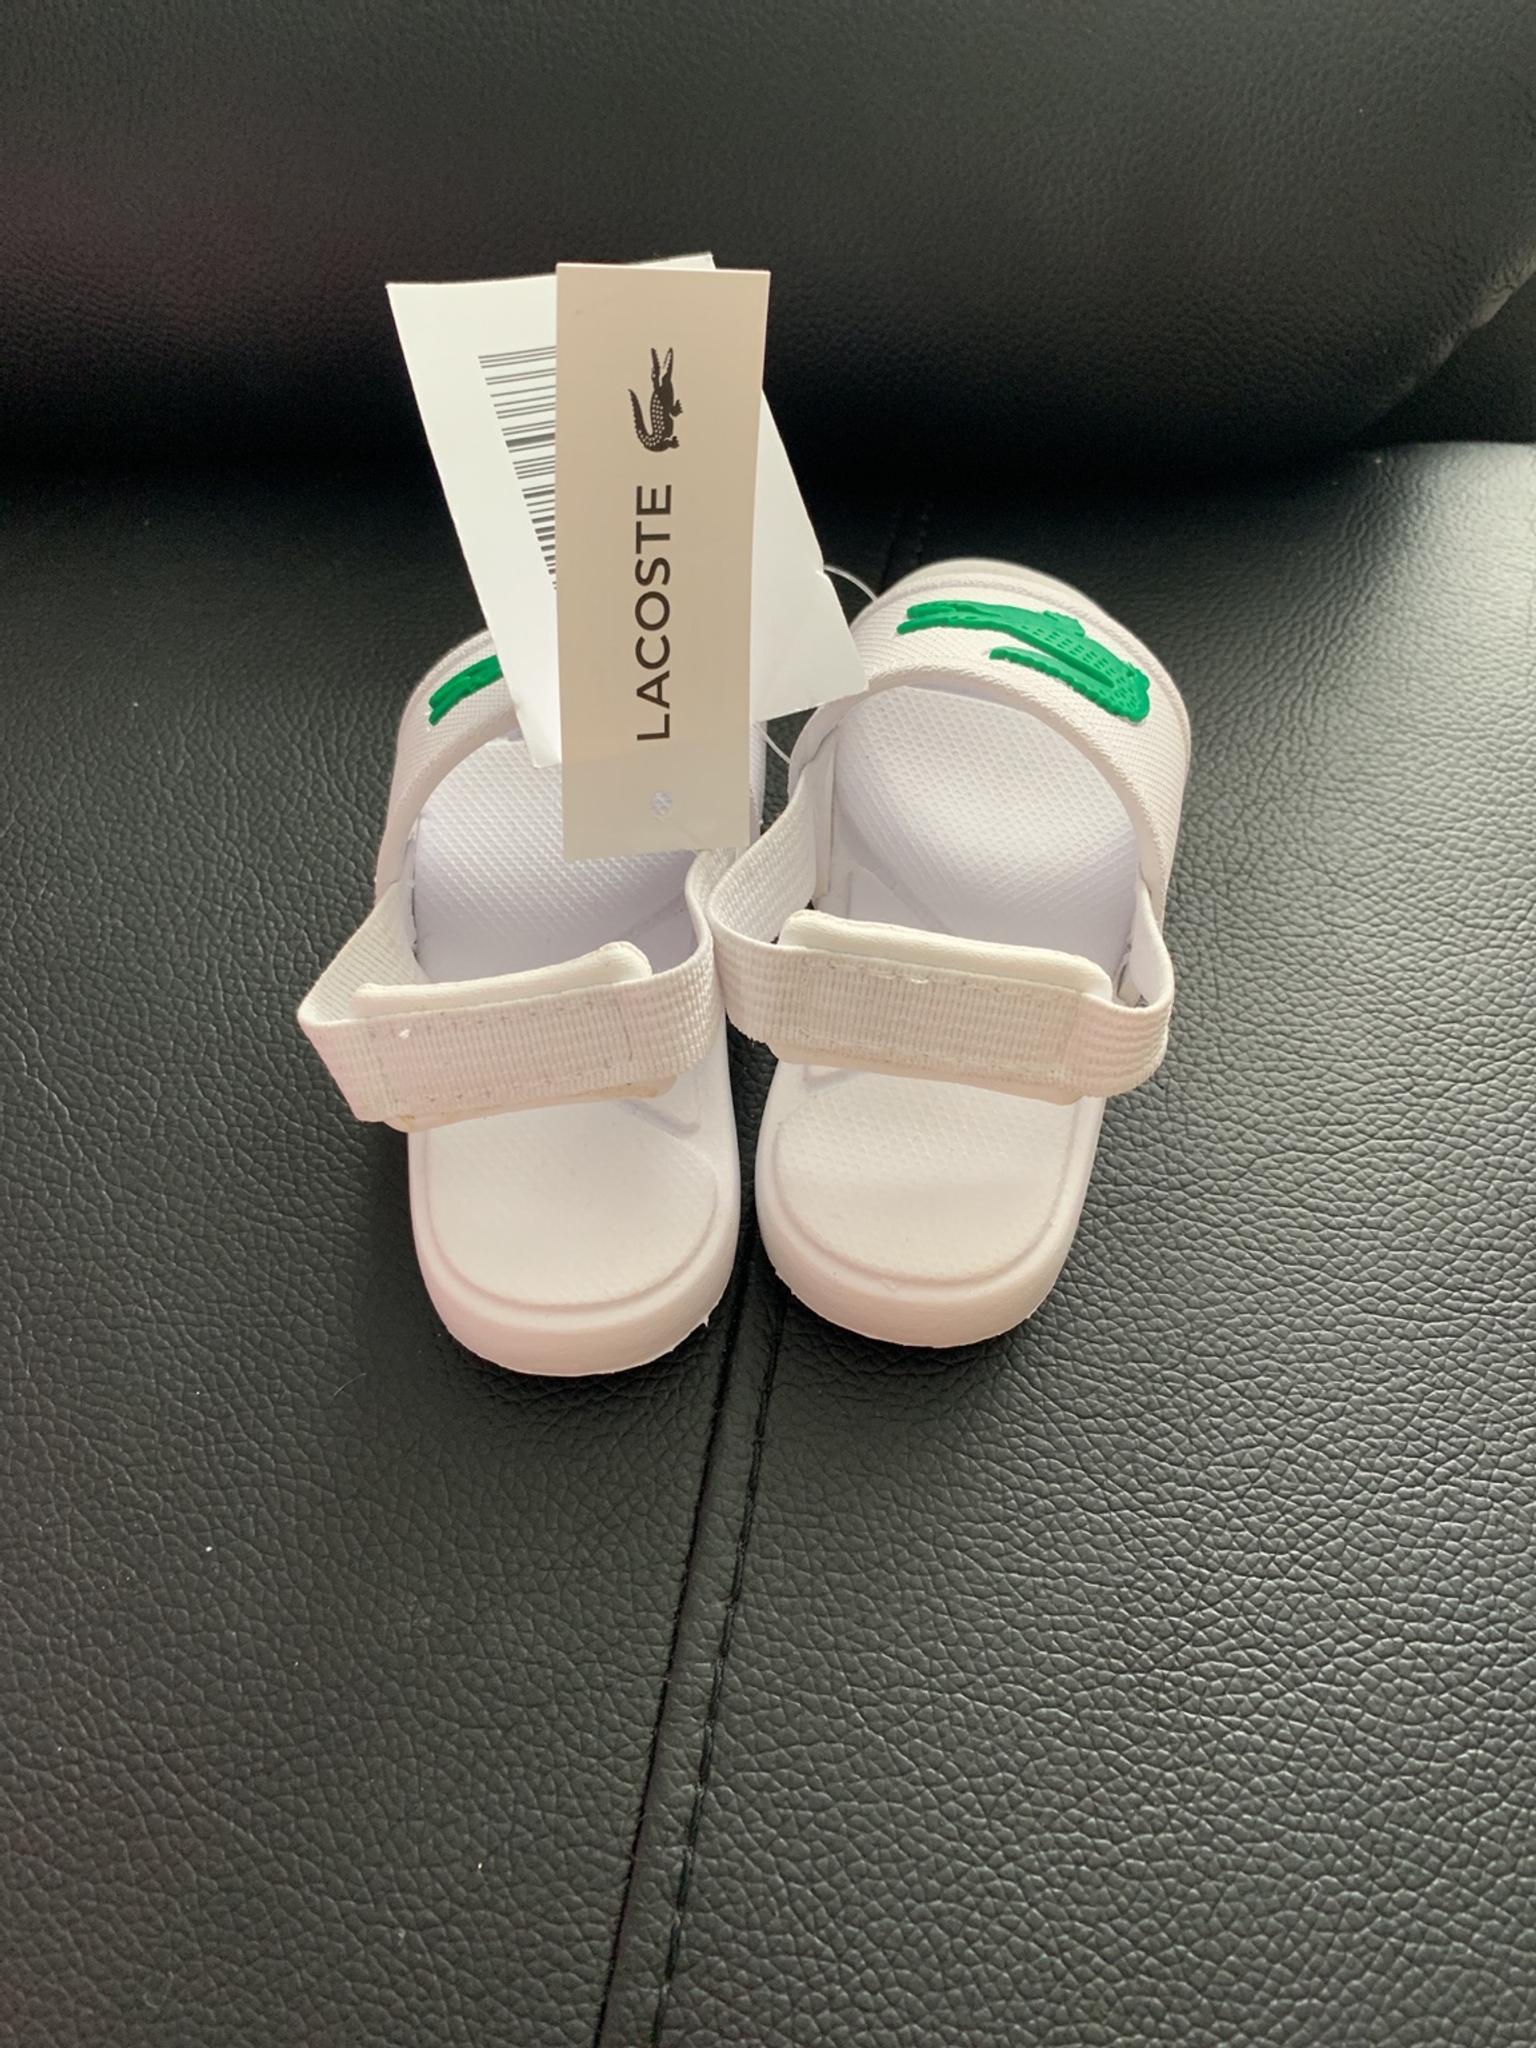 toddler lacoste sliders, OFF 74%,Buy!